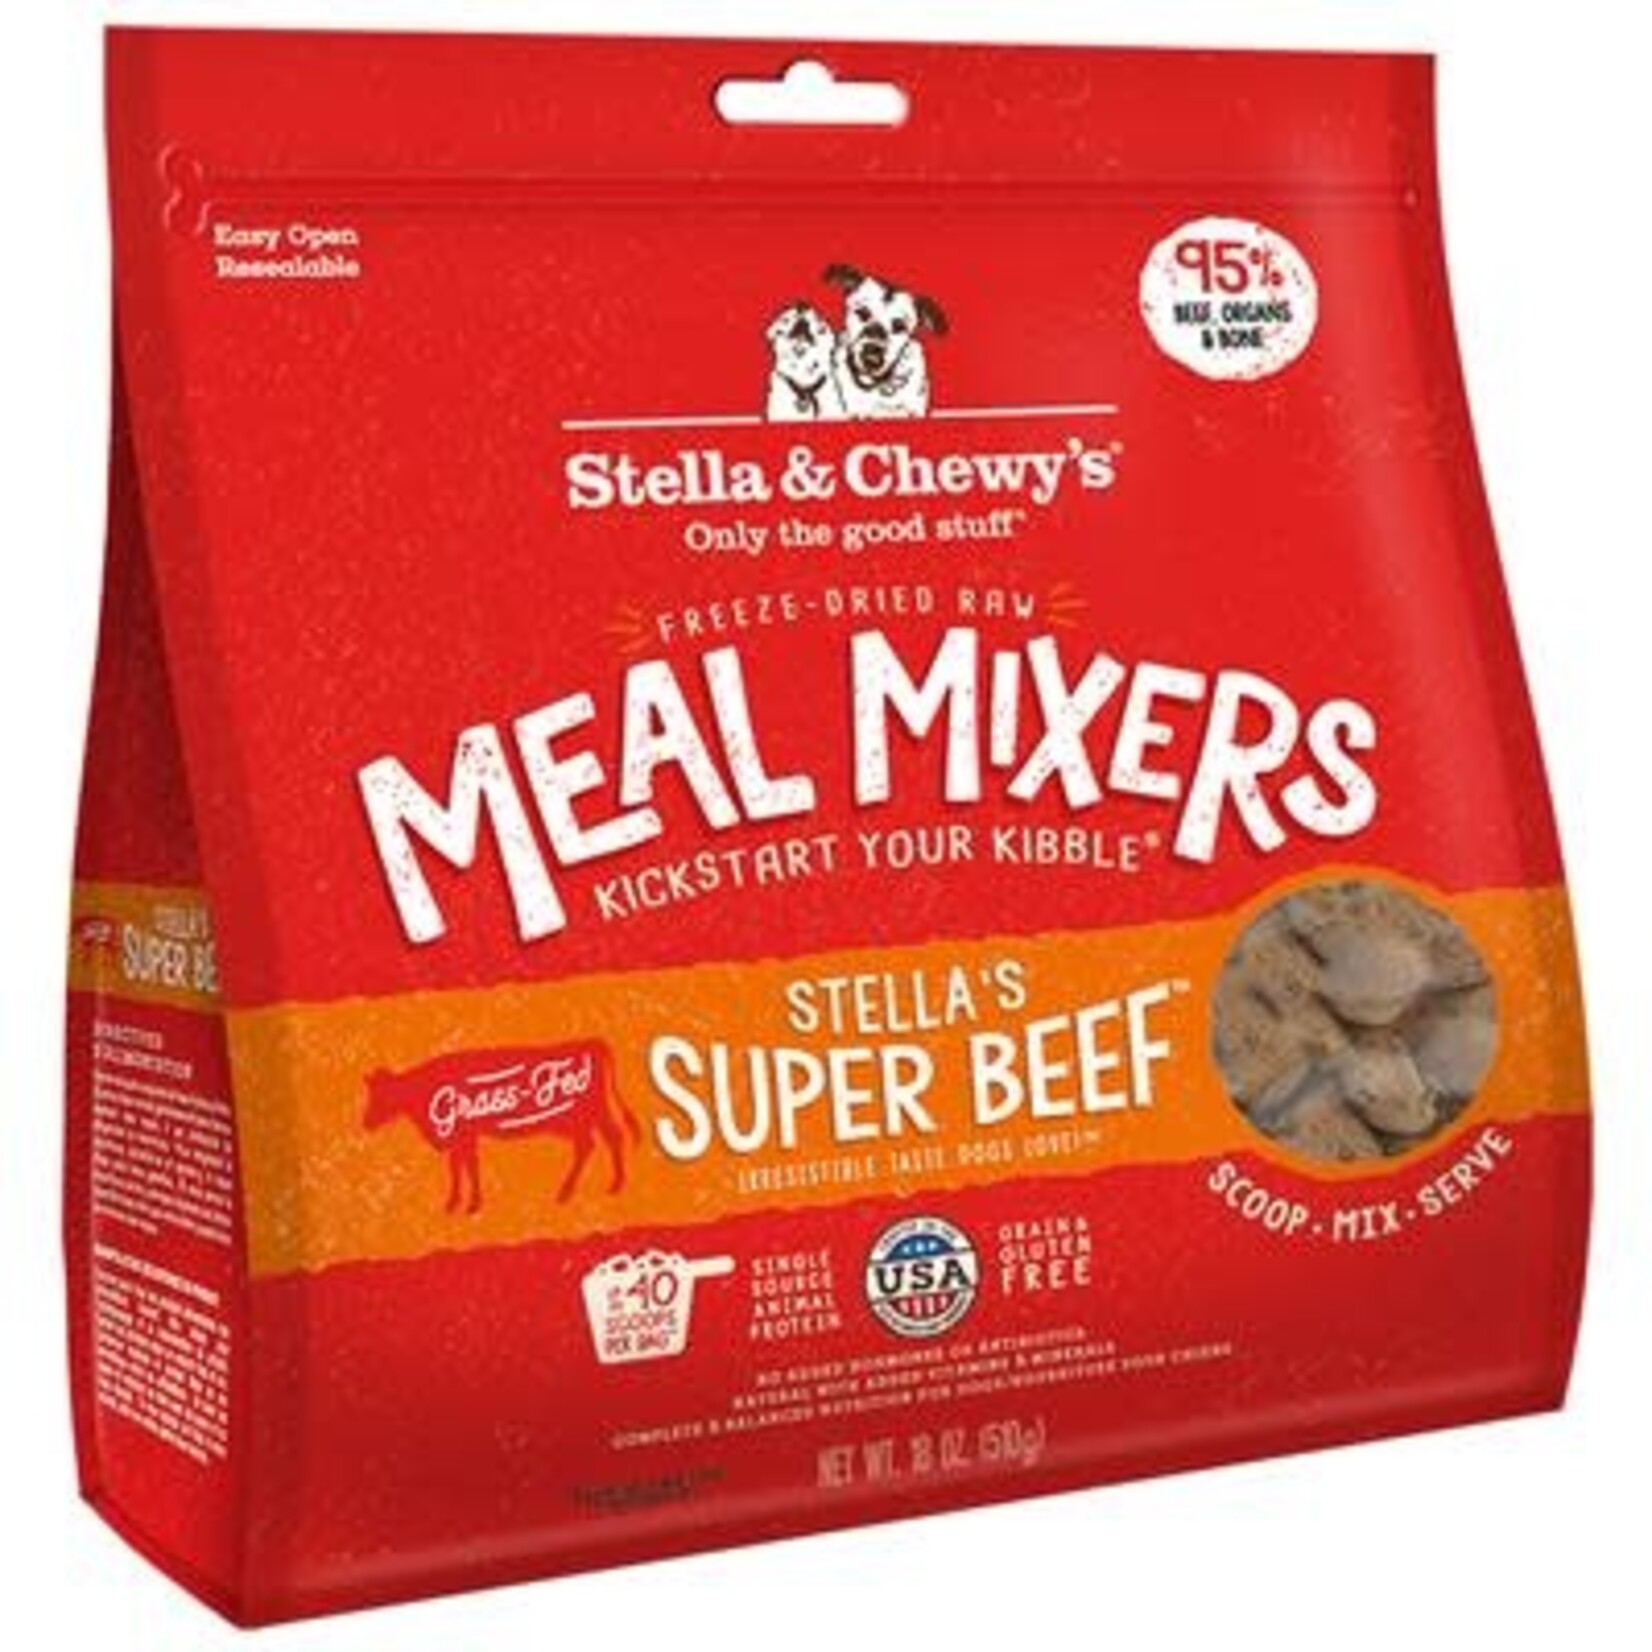 Stella & chewy's SC FD Meal Mixers Stella's Super Beef 18OZ